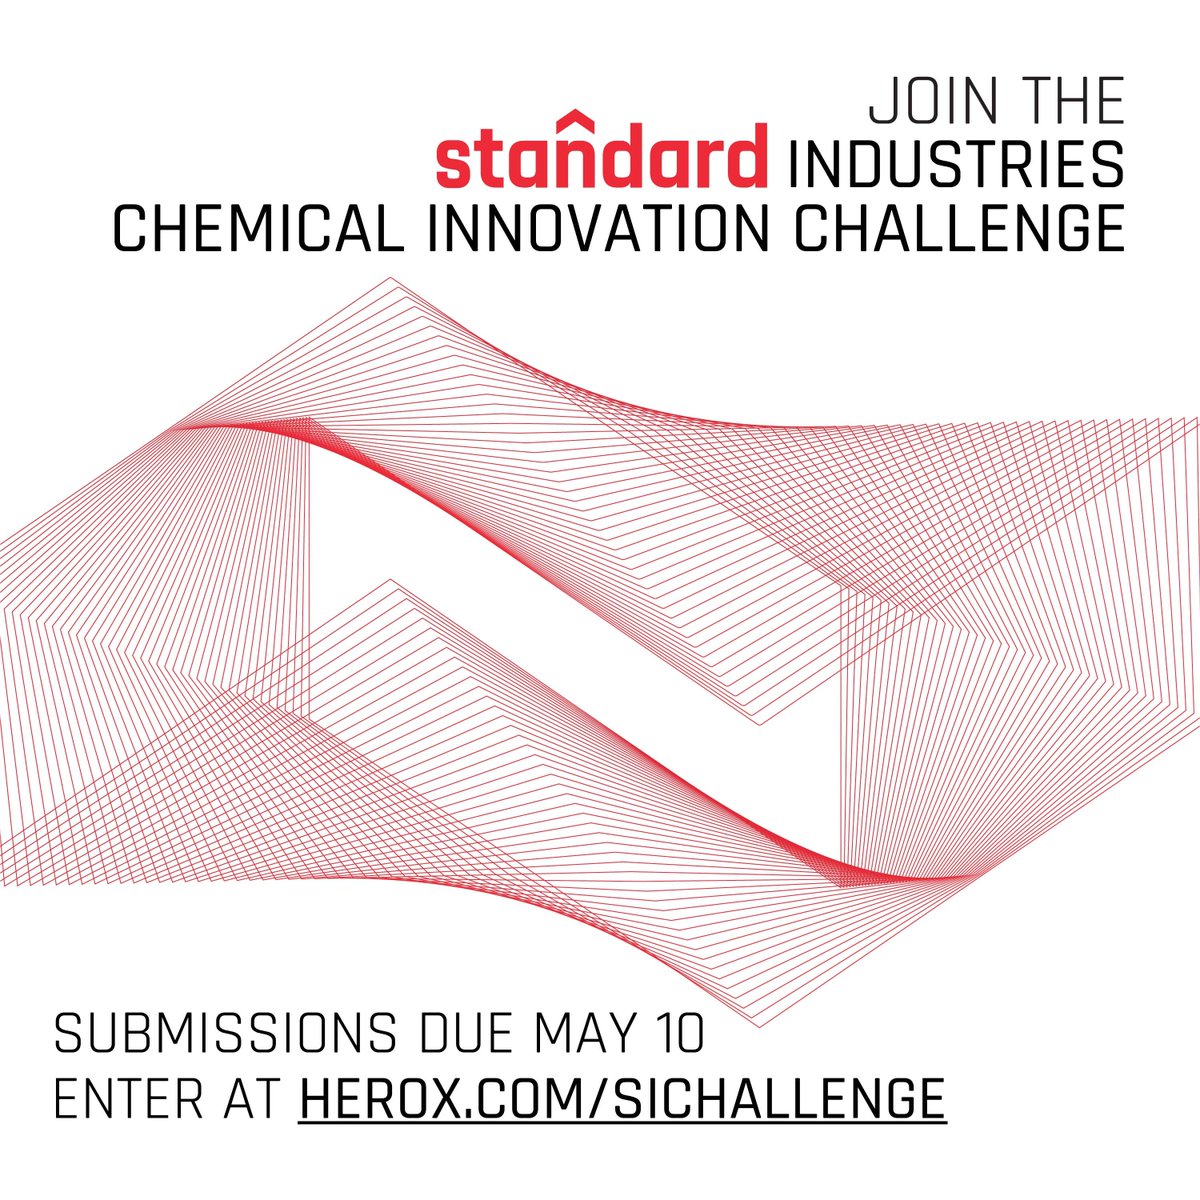 Last call for submissions! Standard Industries and W.R. Grace are inviting innovators from across the globe to develop a machine-based platform that can help scientists effectively develop organic molecules at scale. hubs.ly/Q02tXHSm0